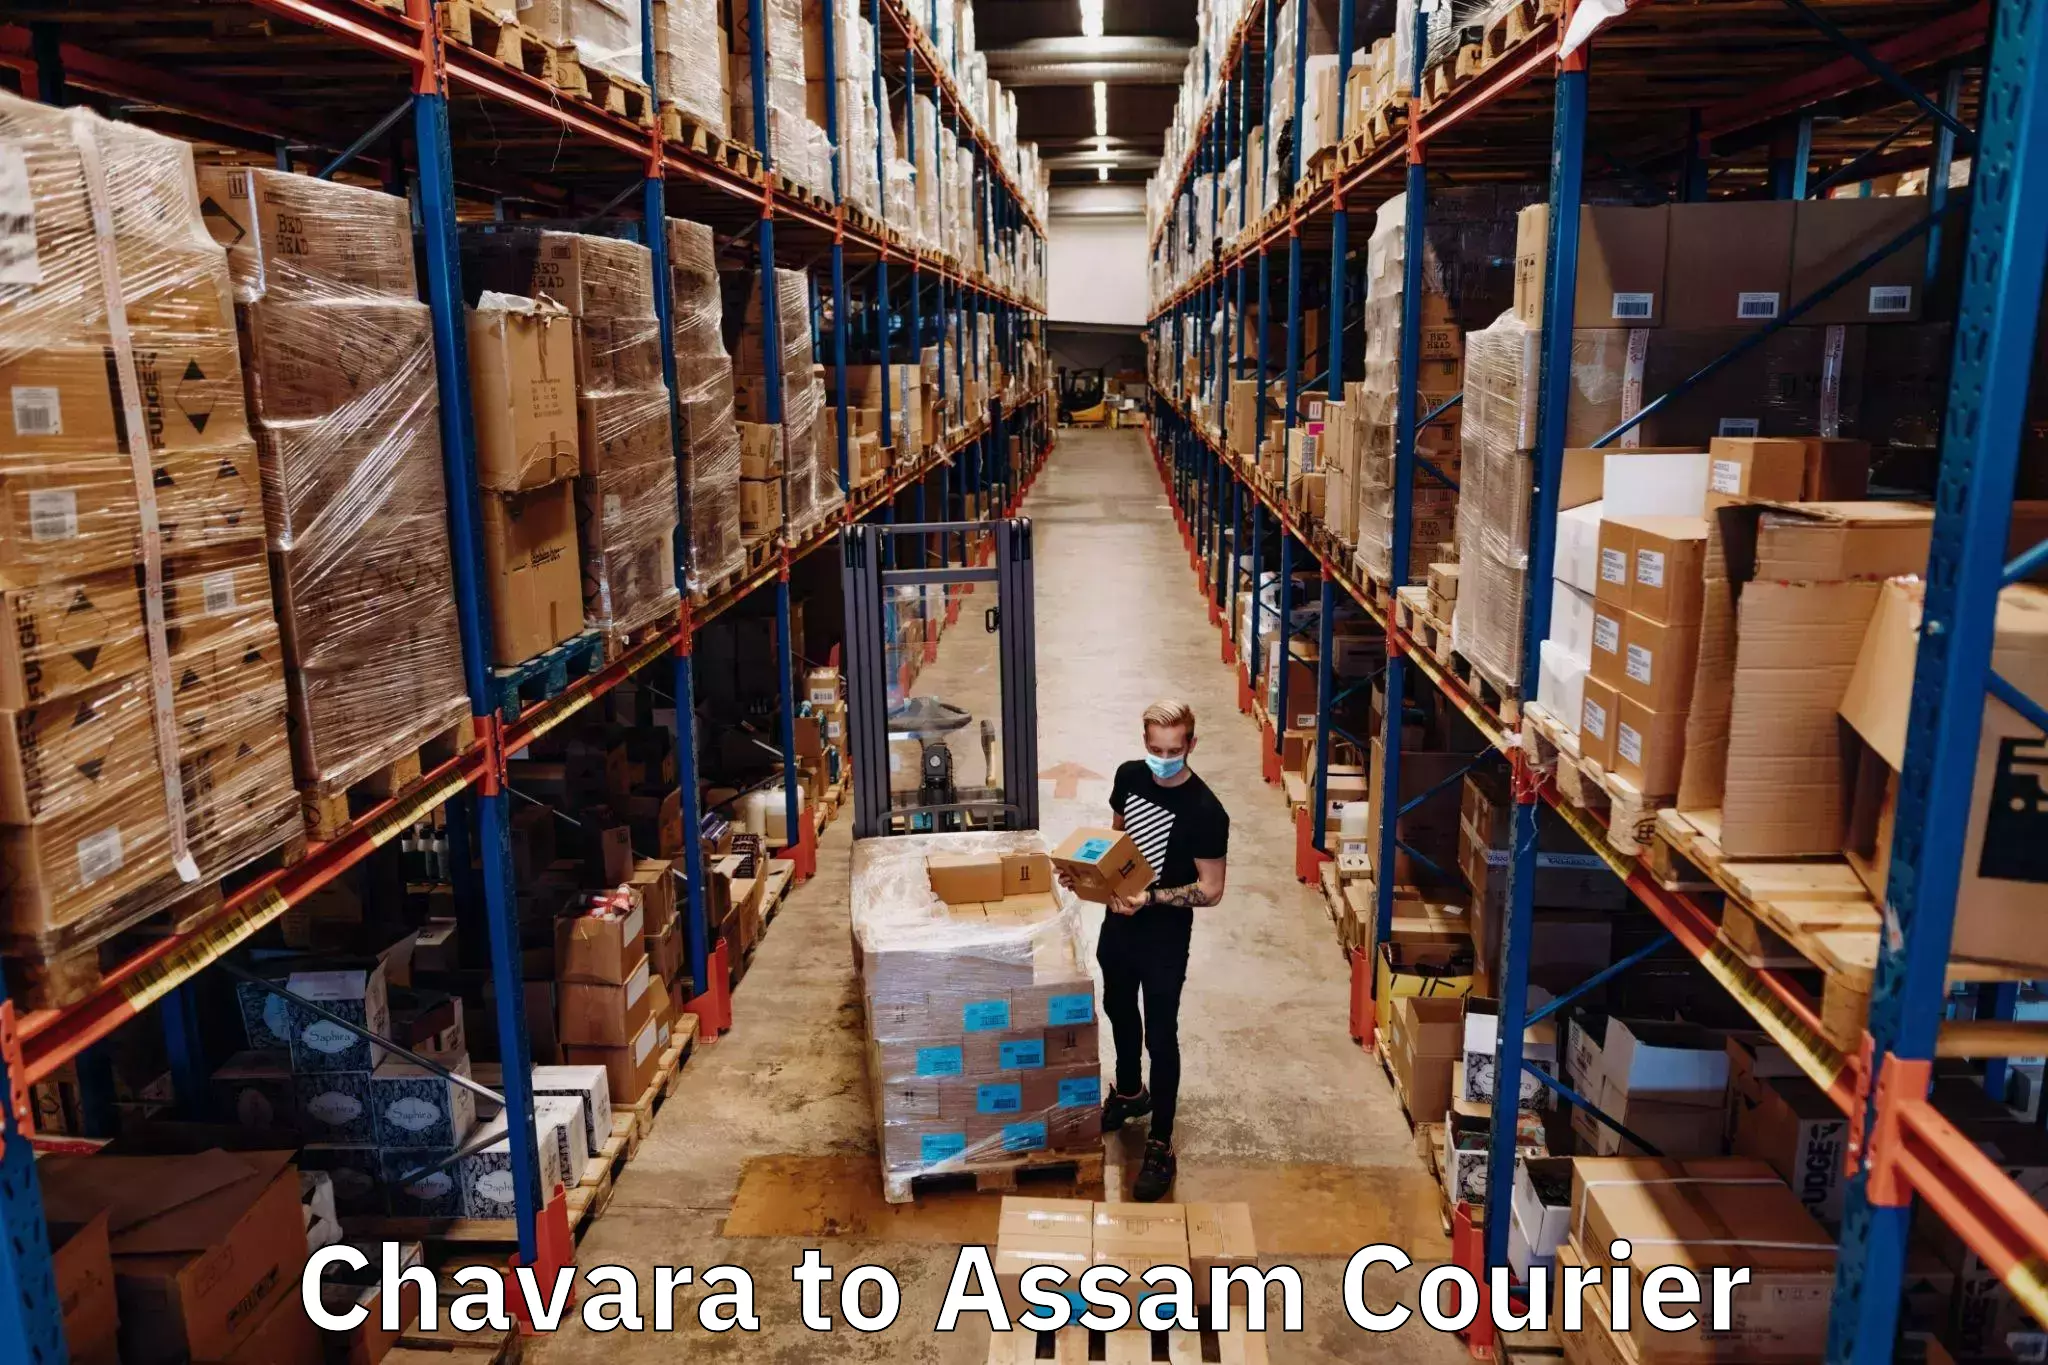 On-call courier service Chavara to Lala Assam